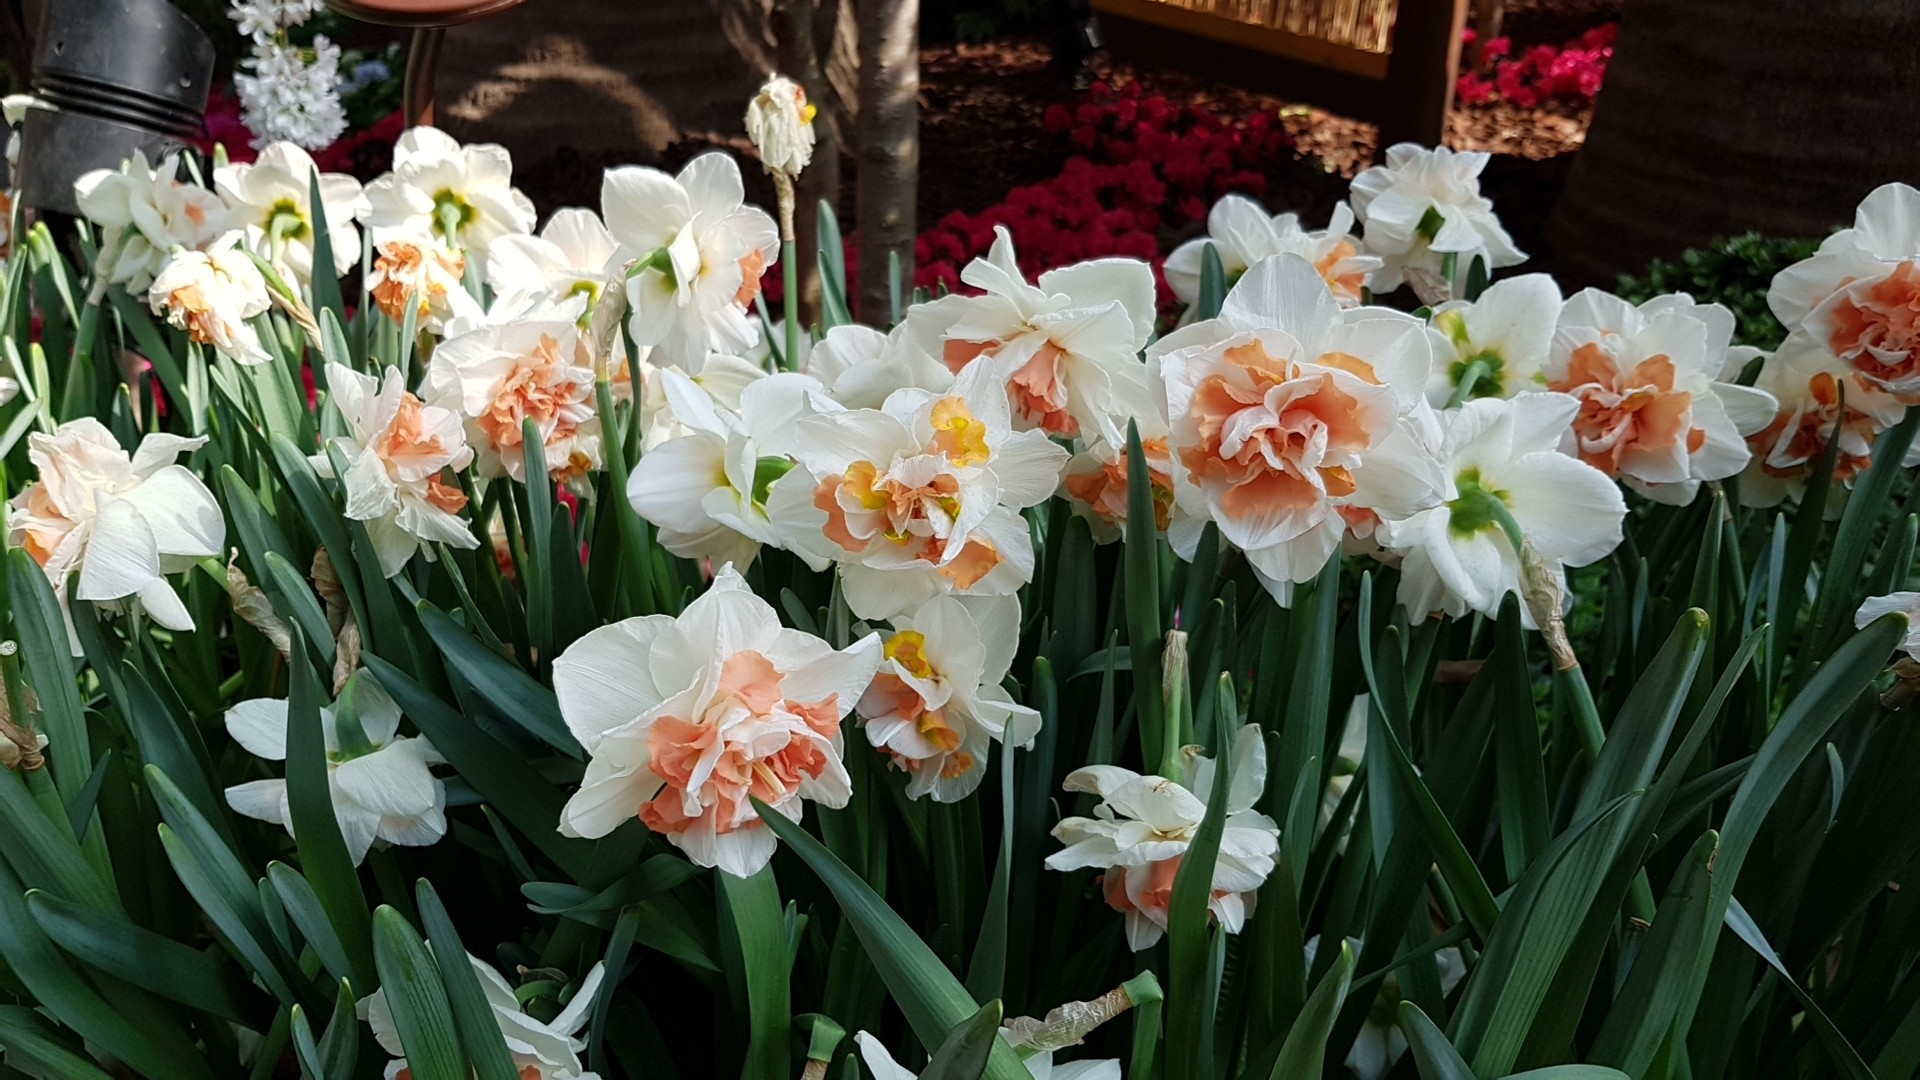 Daffodils 'Delnashaugh' Care (Watering, Fertilize, Pruning, Propagation) -  PictureThis